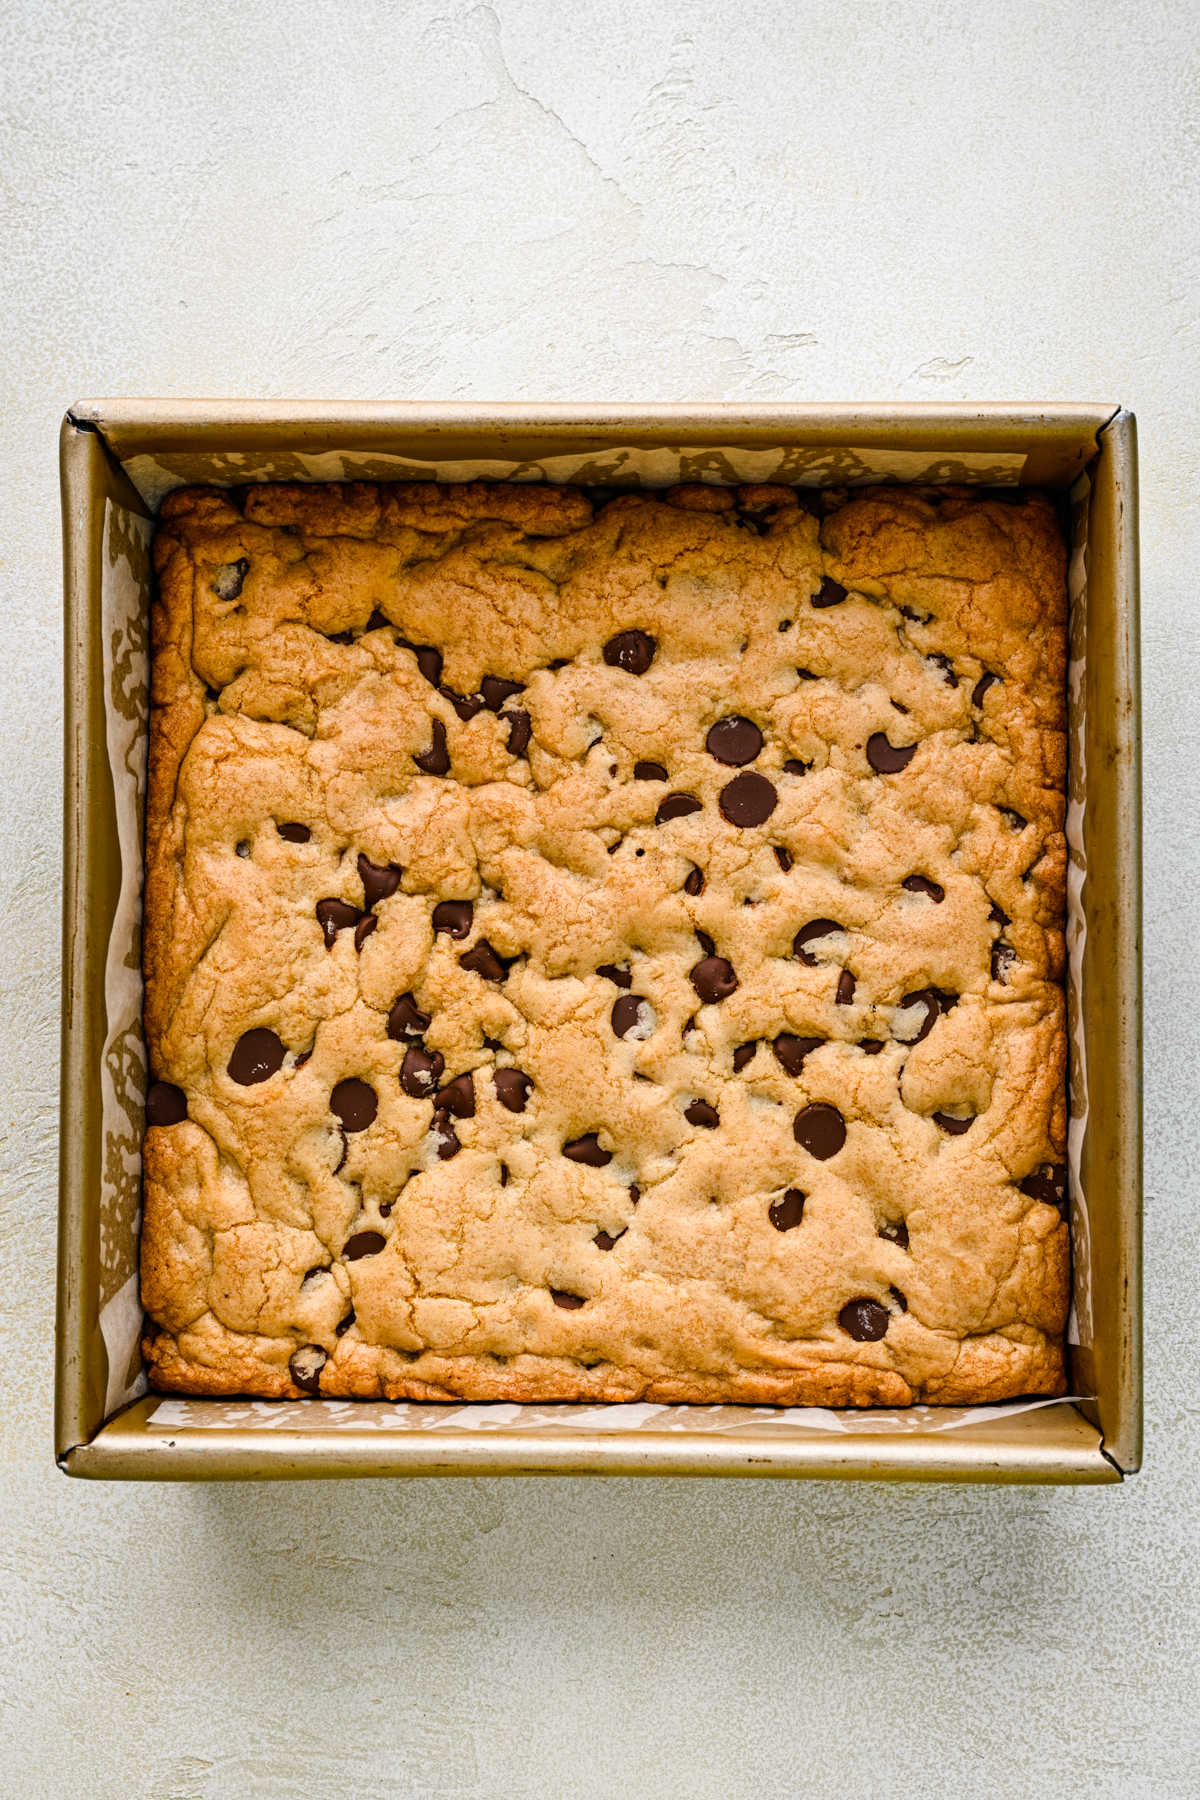 Baked chocolate chip cookie bars in a square baking pan.